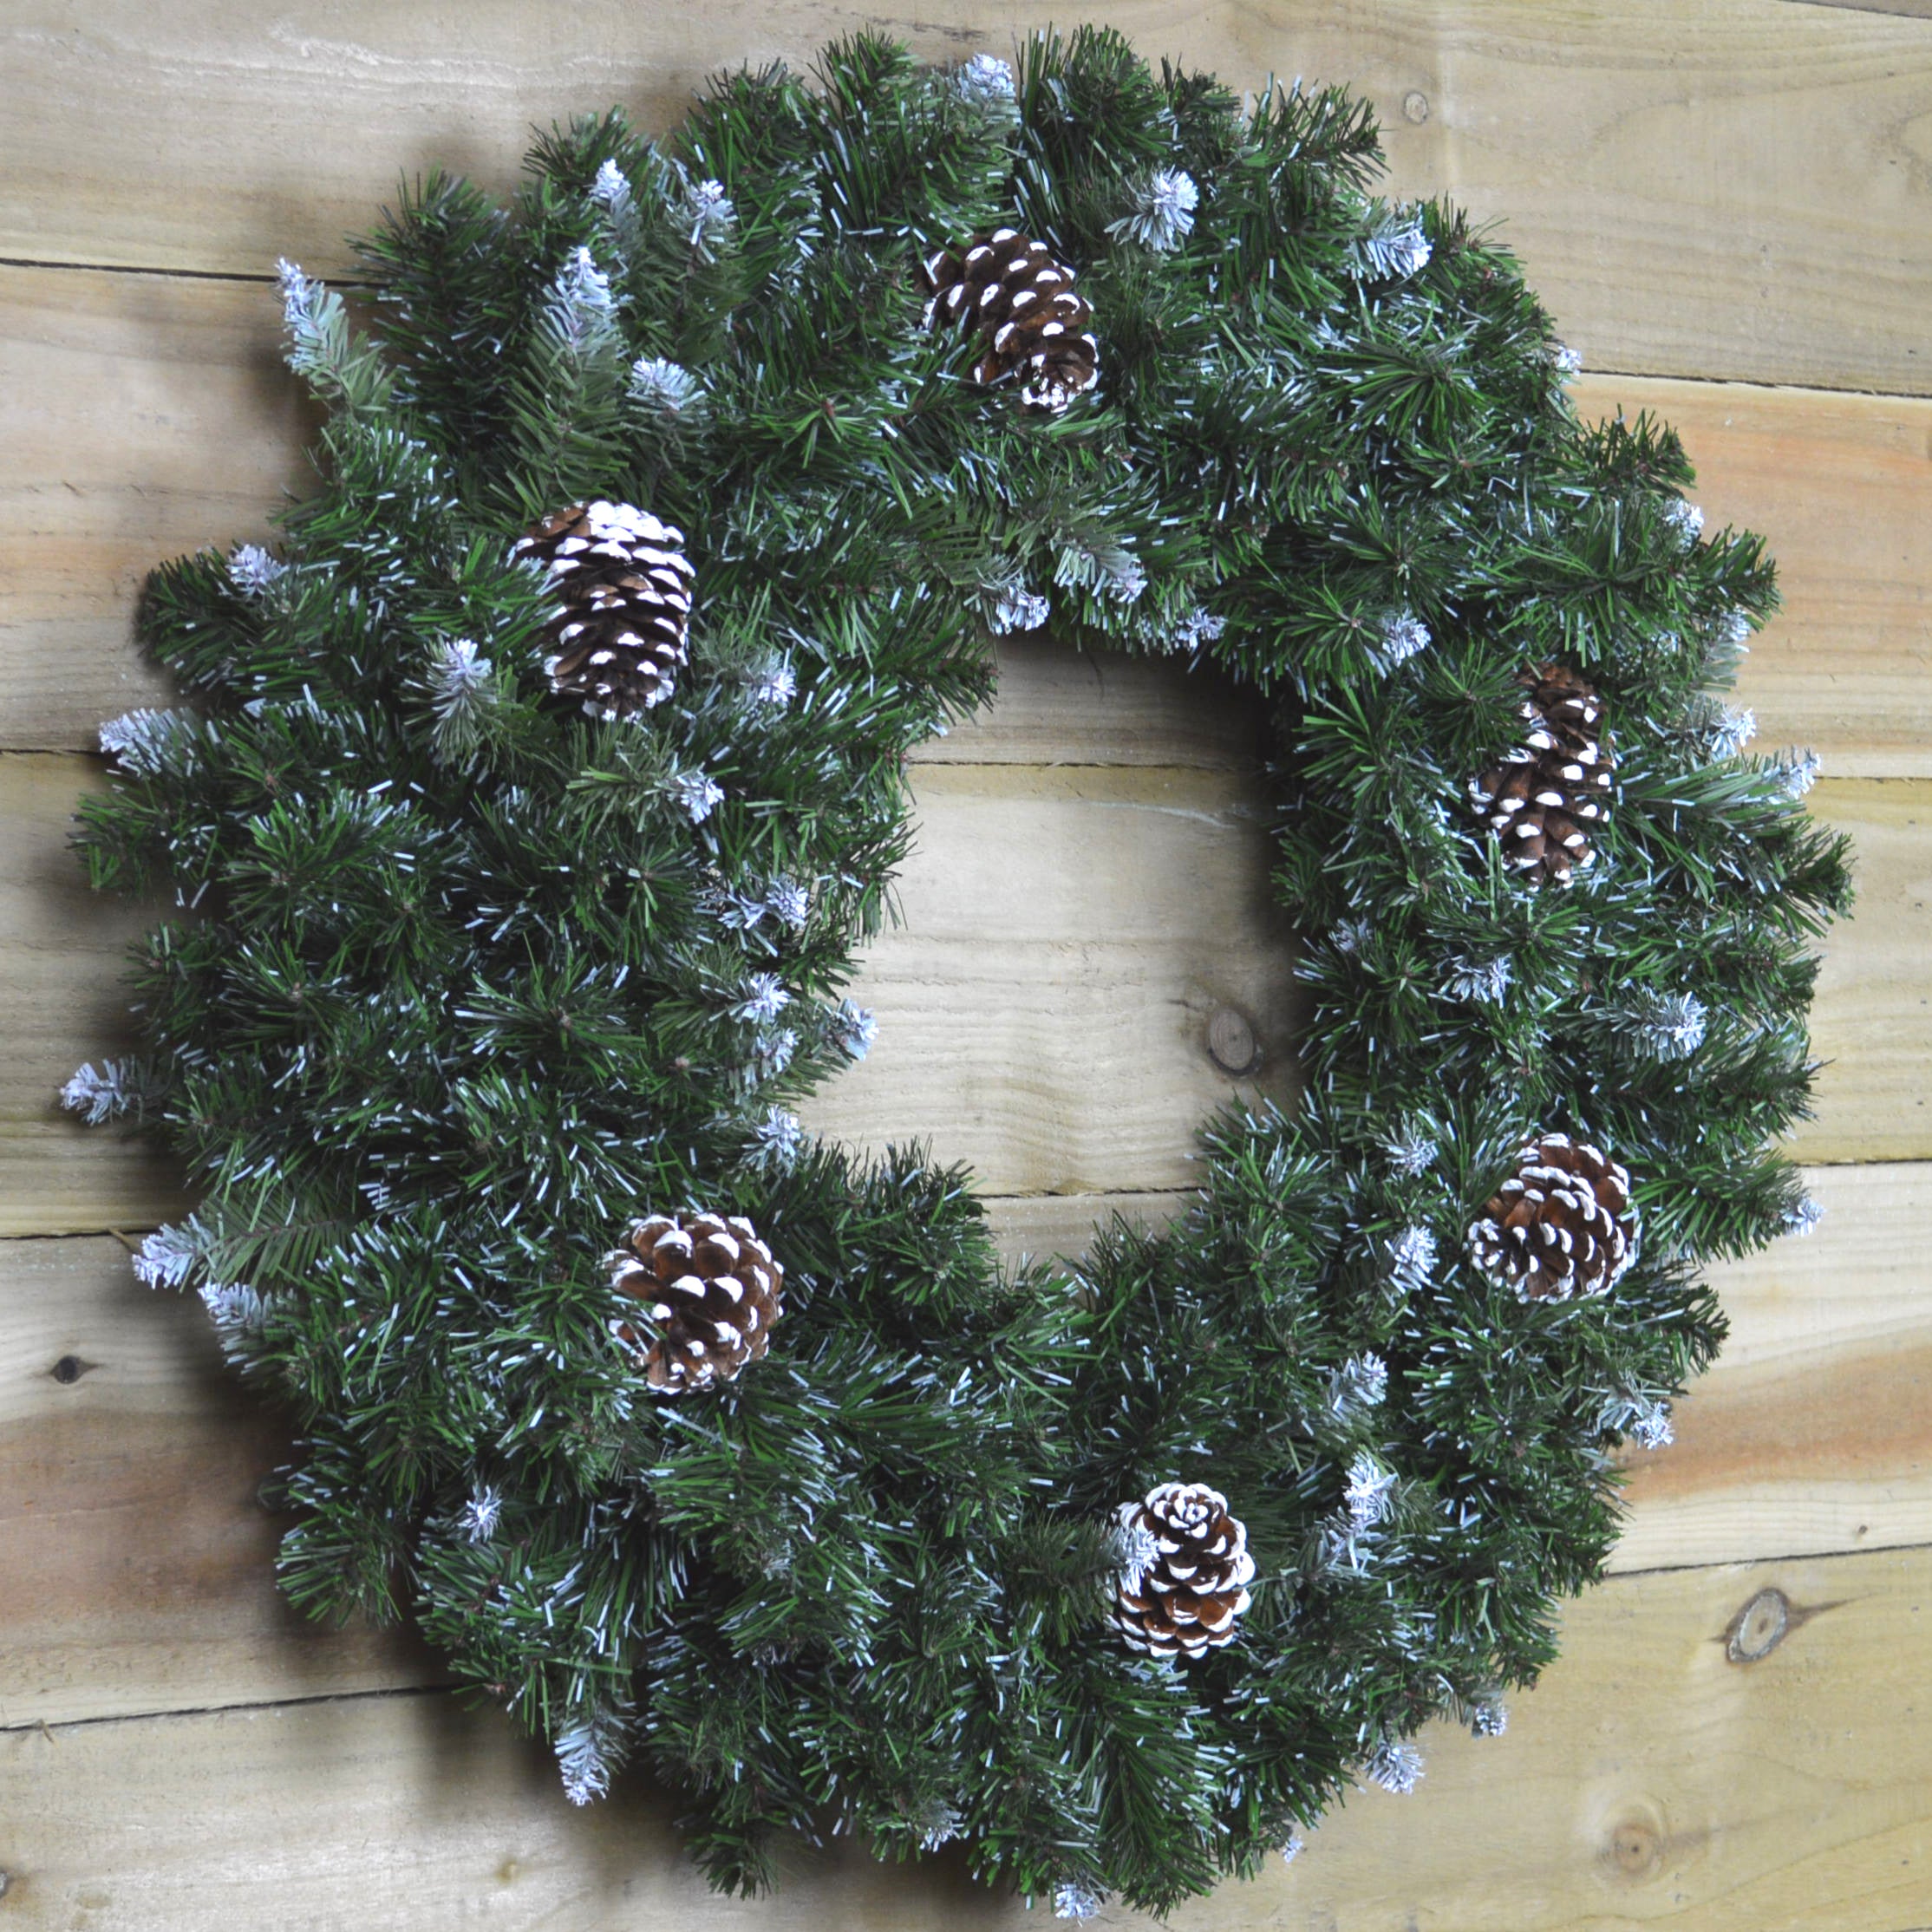 60cm Snow King Fir Green Christmas Wreath with Pine Cones